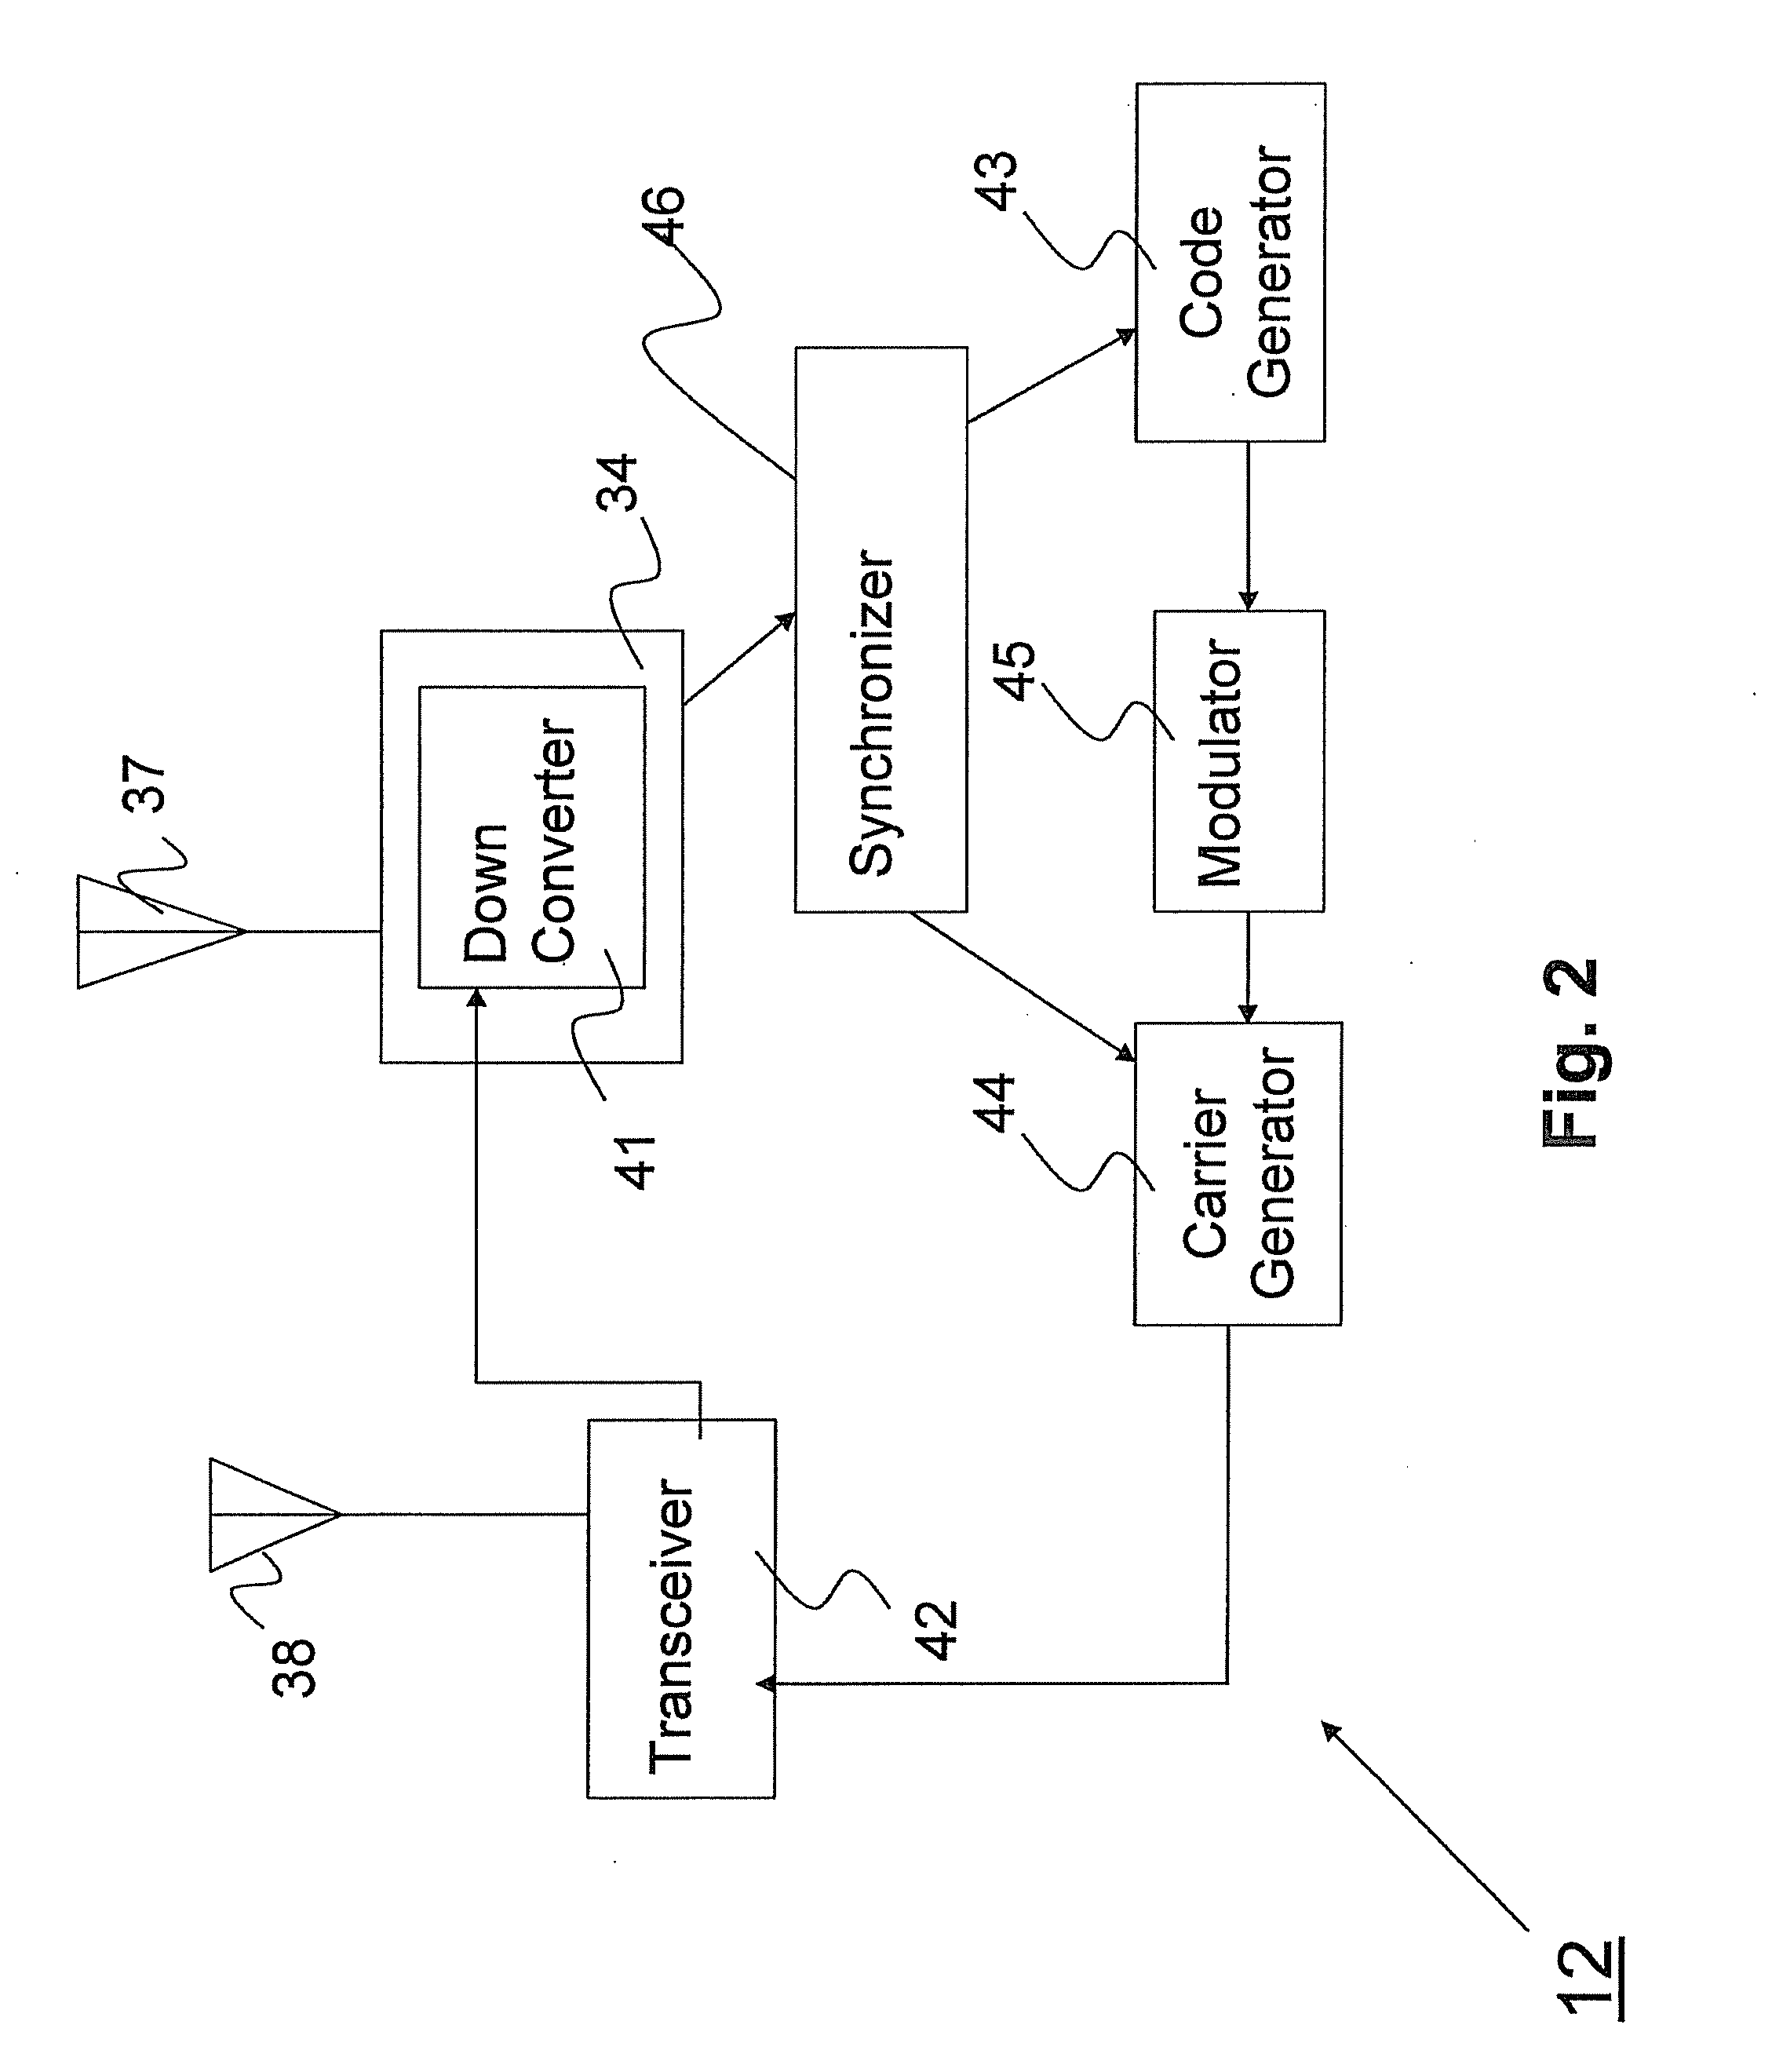 System for determining position using two way time transfer signals